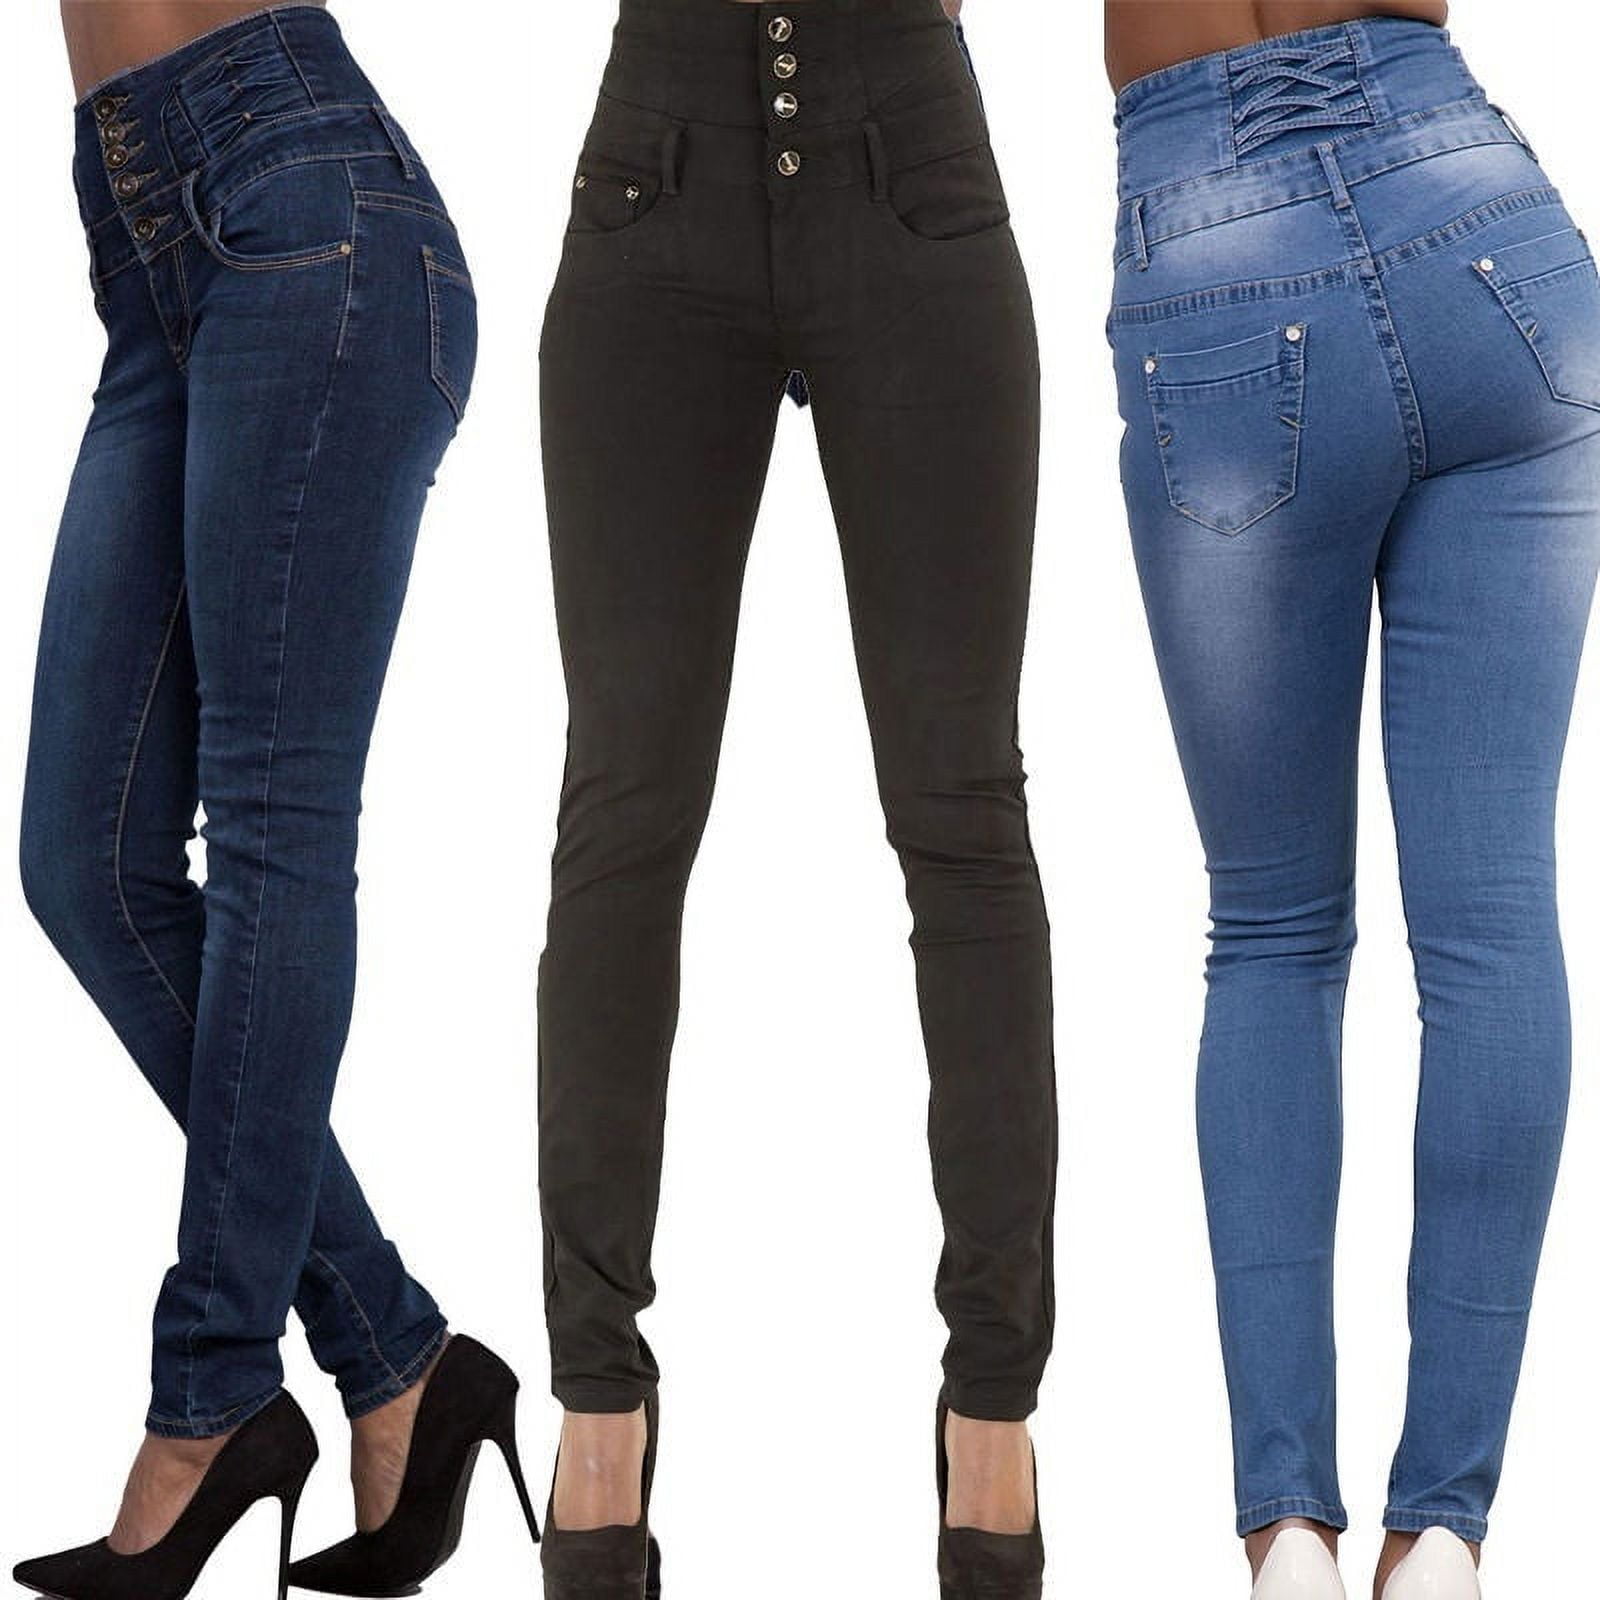 Women Ladies Black Blue High Waisted Skinny jeans size 6 8 10 12